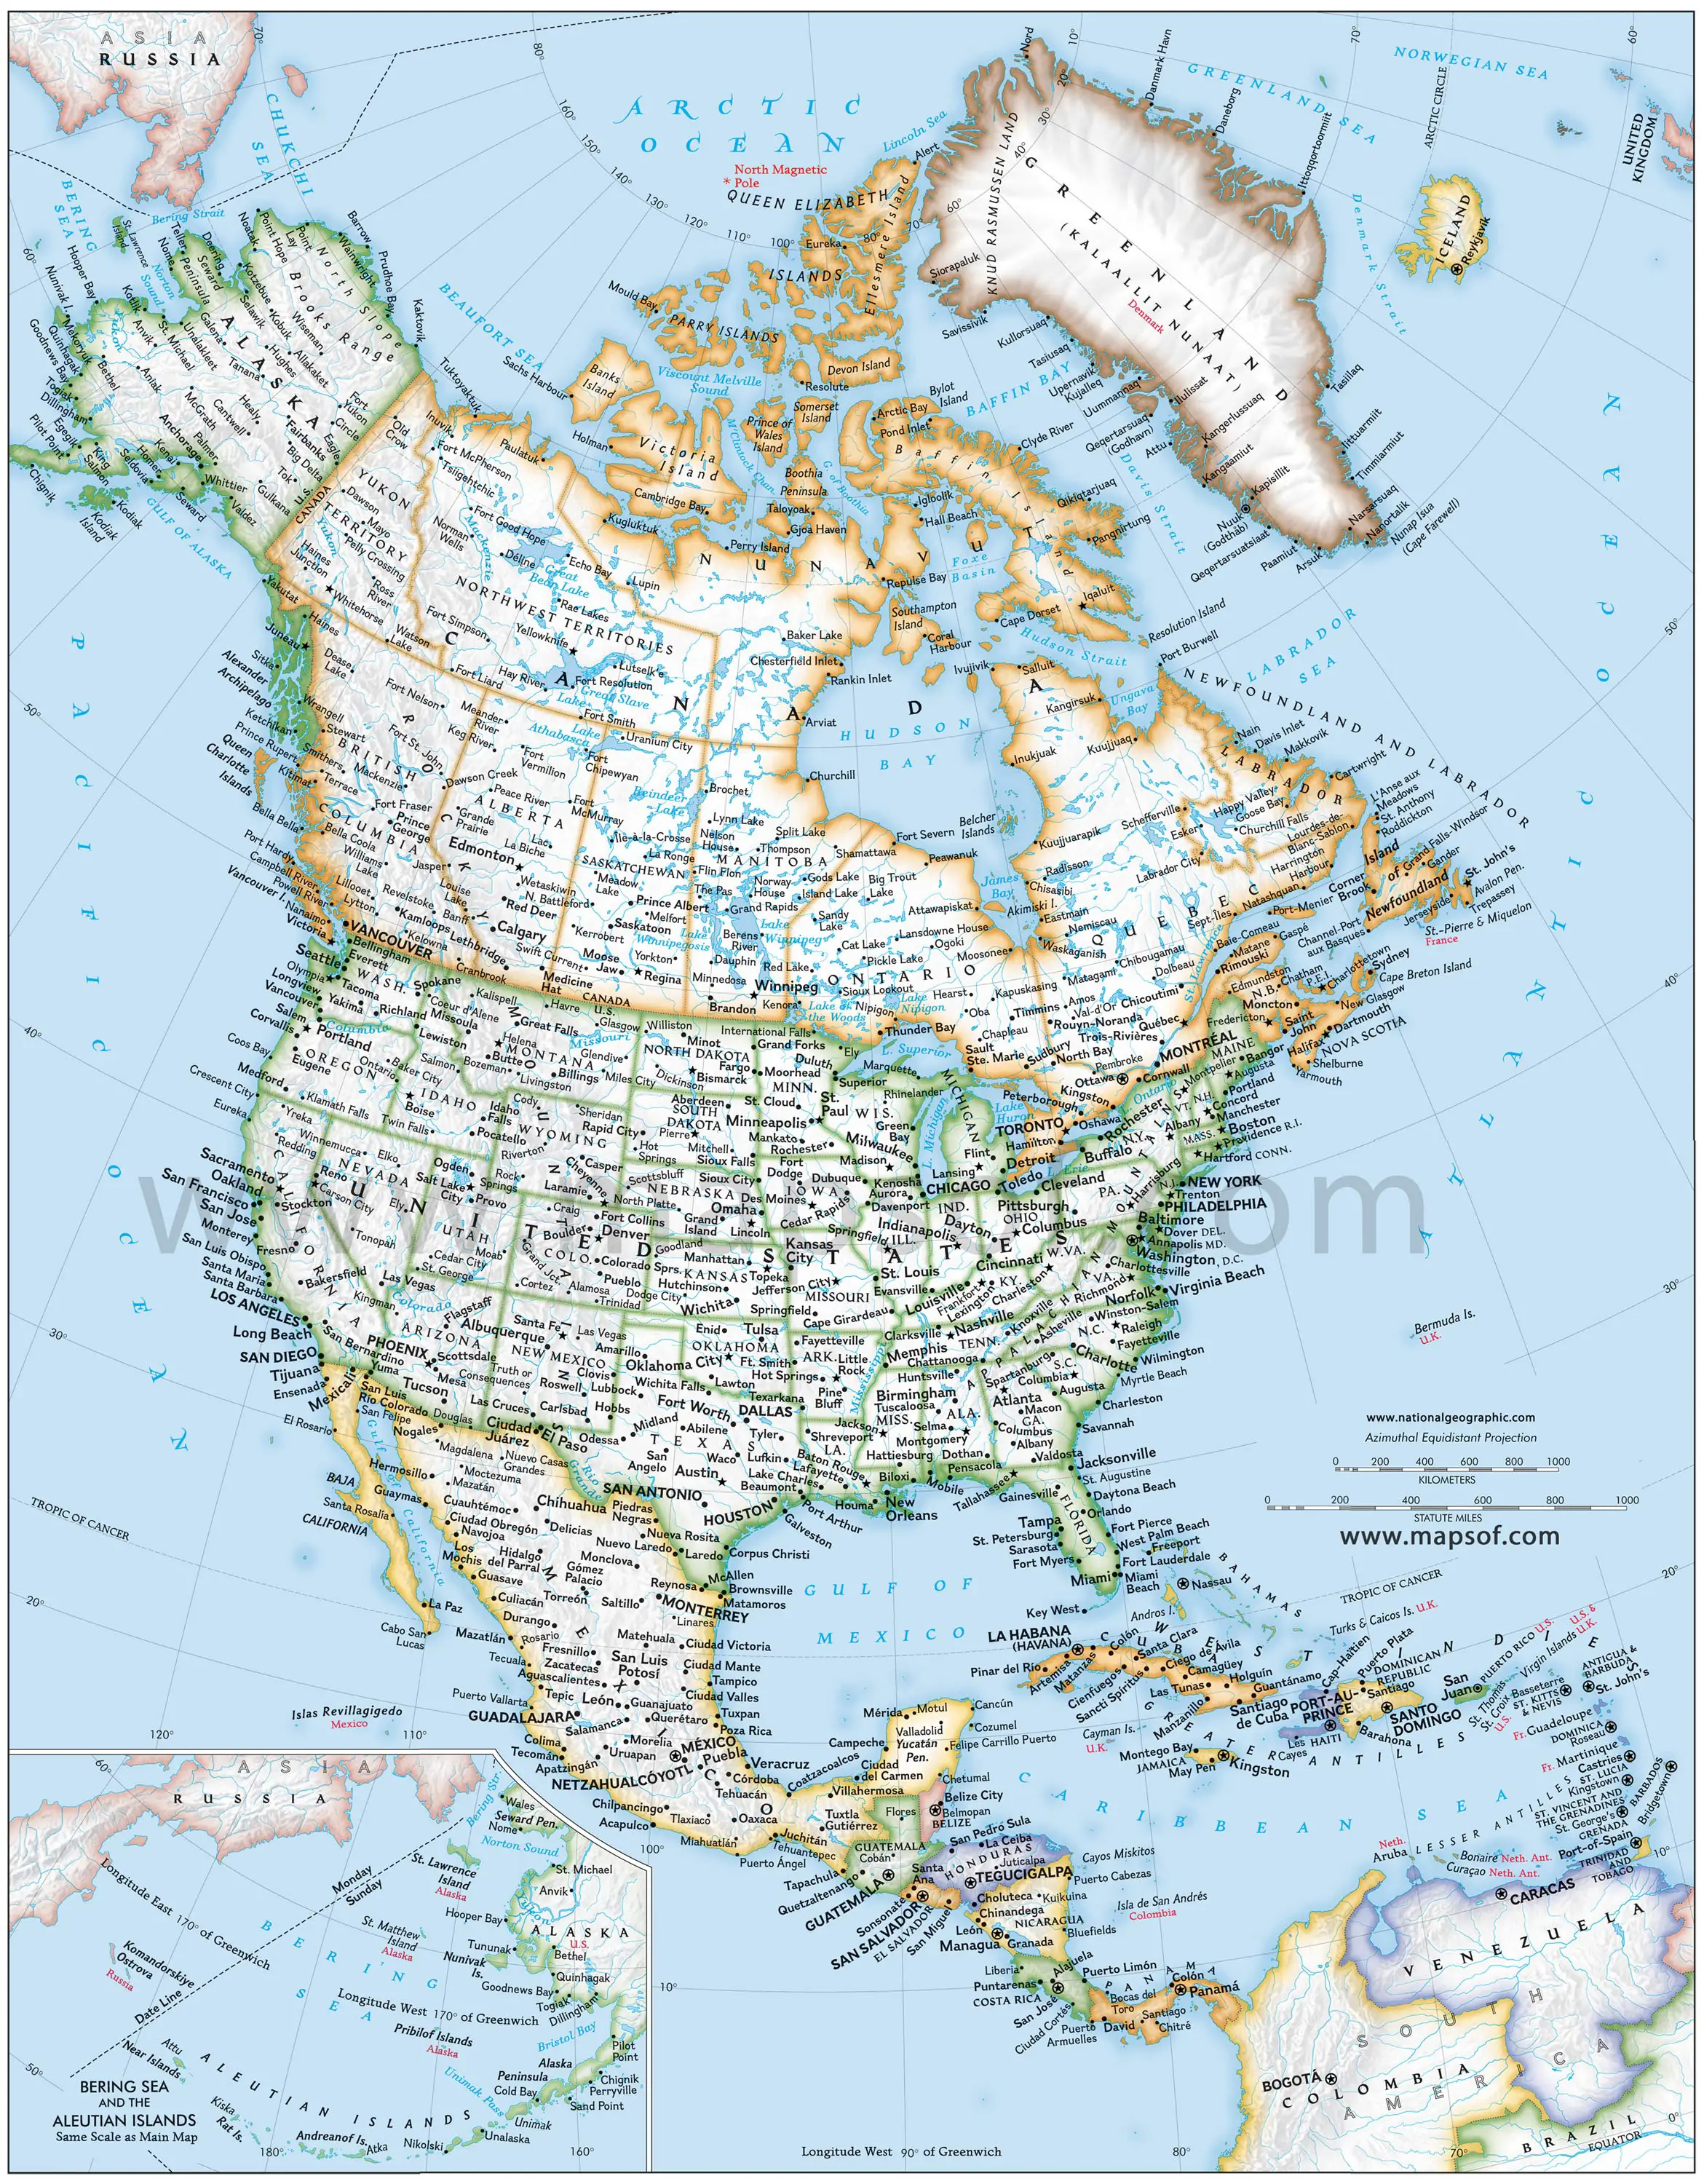 North America Map With States And Cities - United States Map